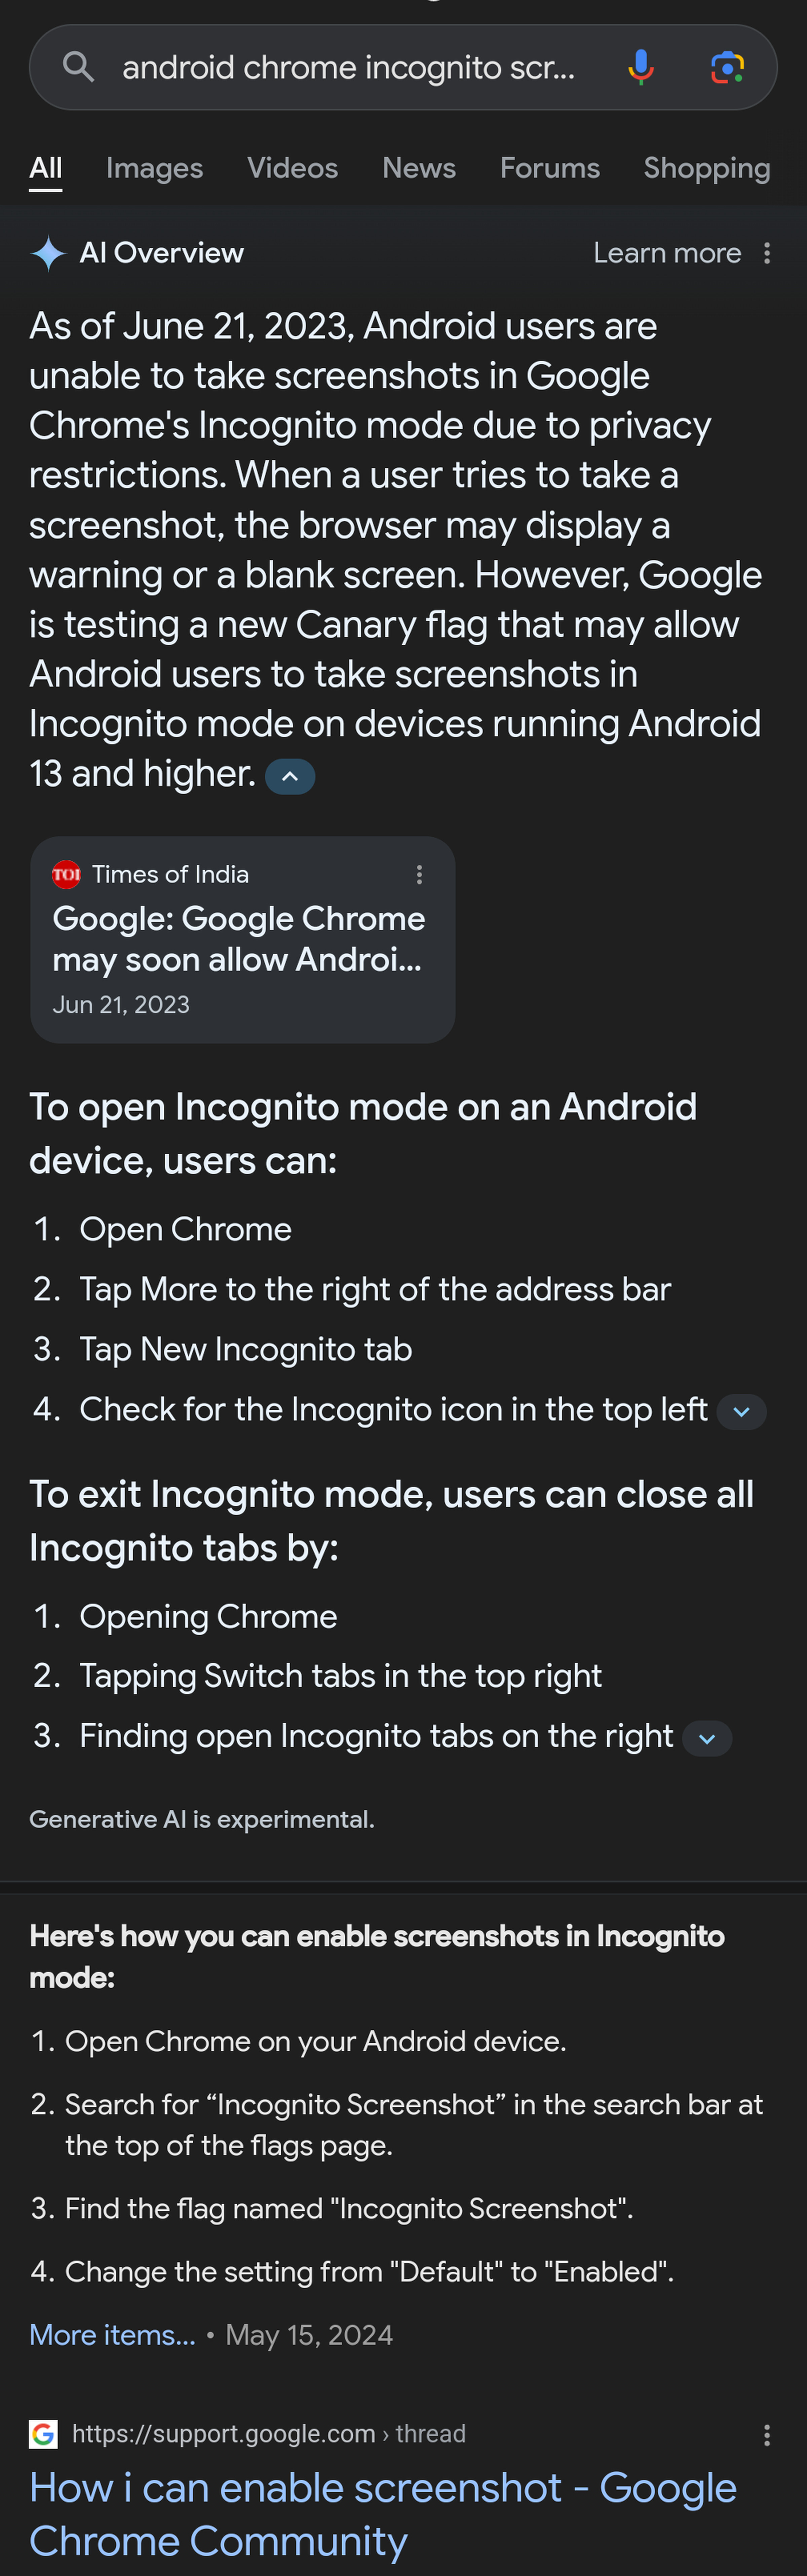 As of June 21, 2023, Android users are unable to take screenshots in Google Chrome’s Incognito mode due to privacy restrictions. When a user tries to take a screenshot, the browser may display a warning or a blank screen. However, Google is testing a new Canary flag that may allow Android users to take screenshots in Incognito mode on devices running Android 13 and higher.